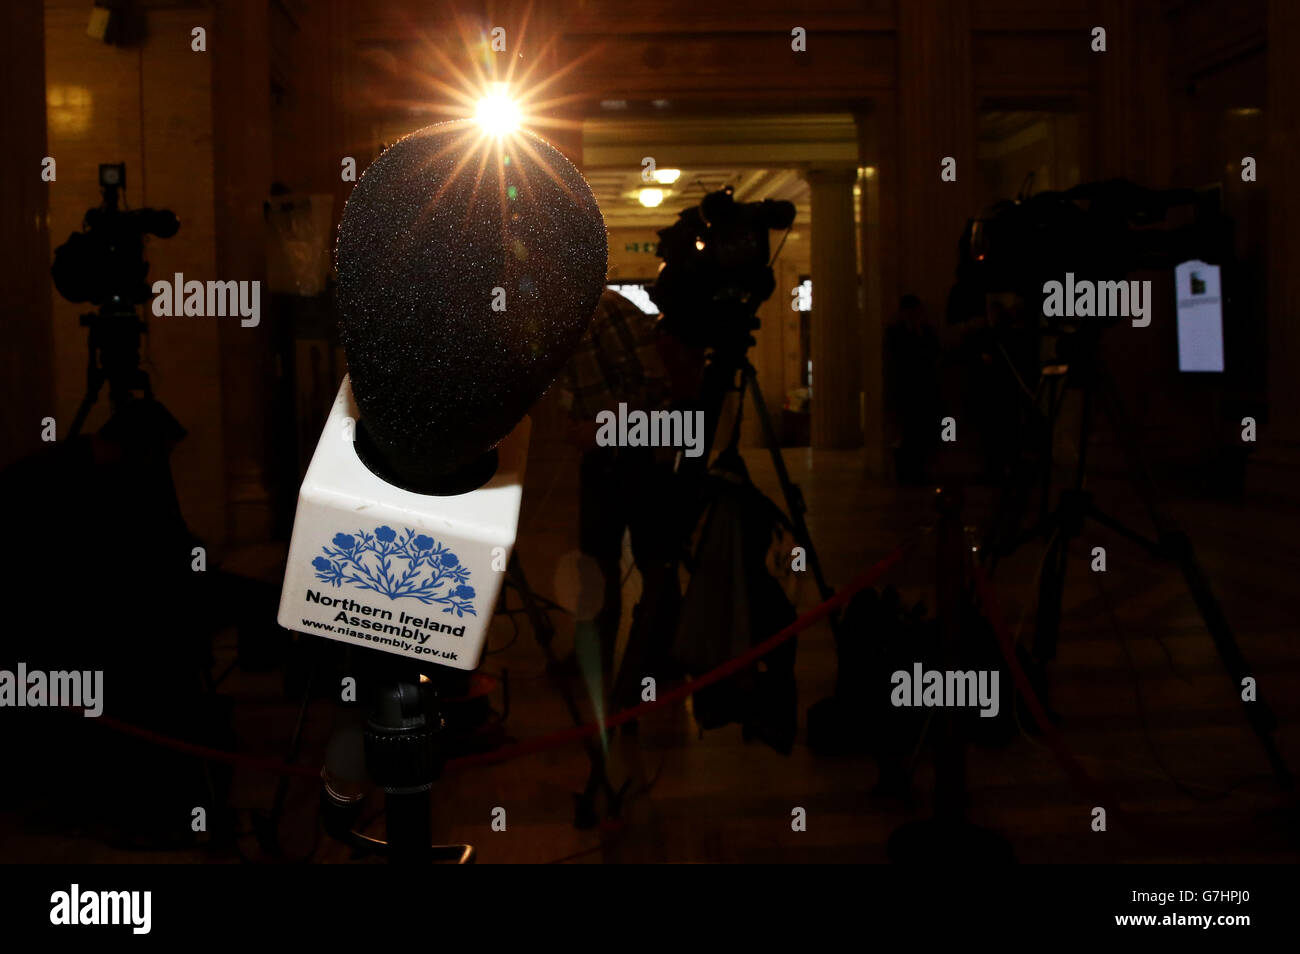 The media wait in the Great Hall at Parliament Buildings, Stormont, as political talks continue in Stormont House. Stock Photo